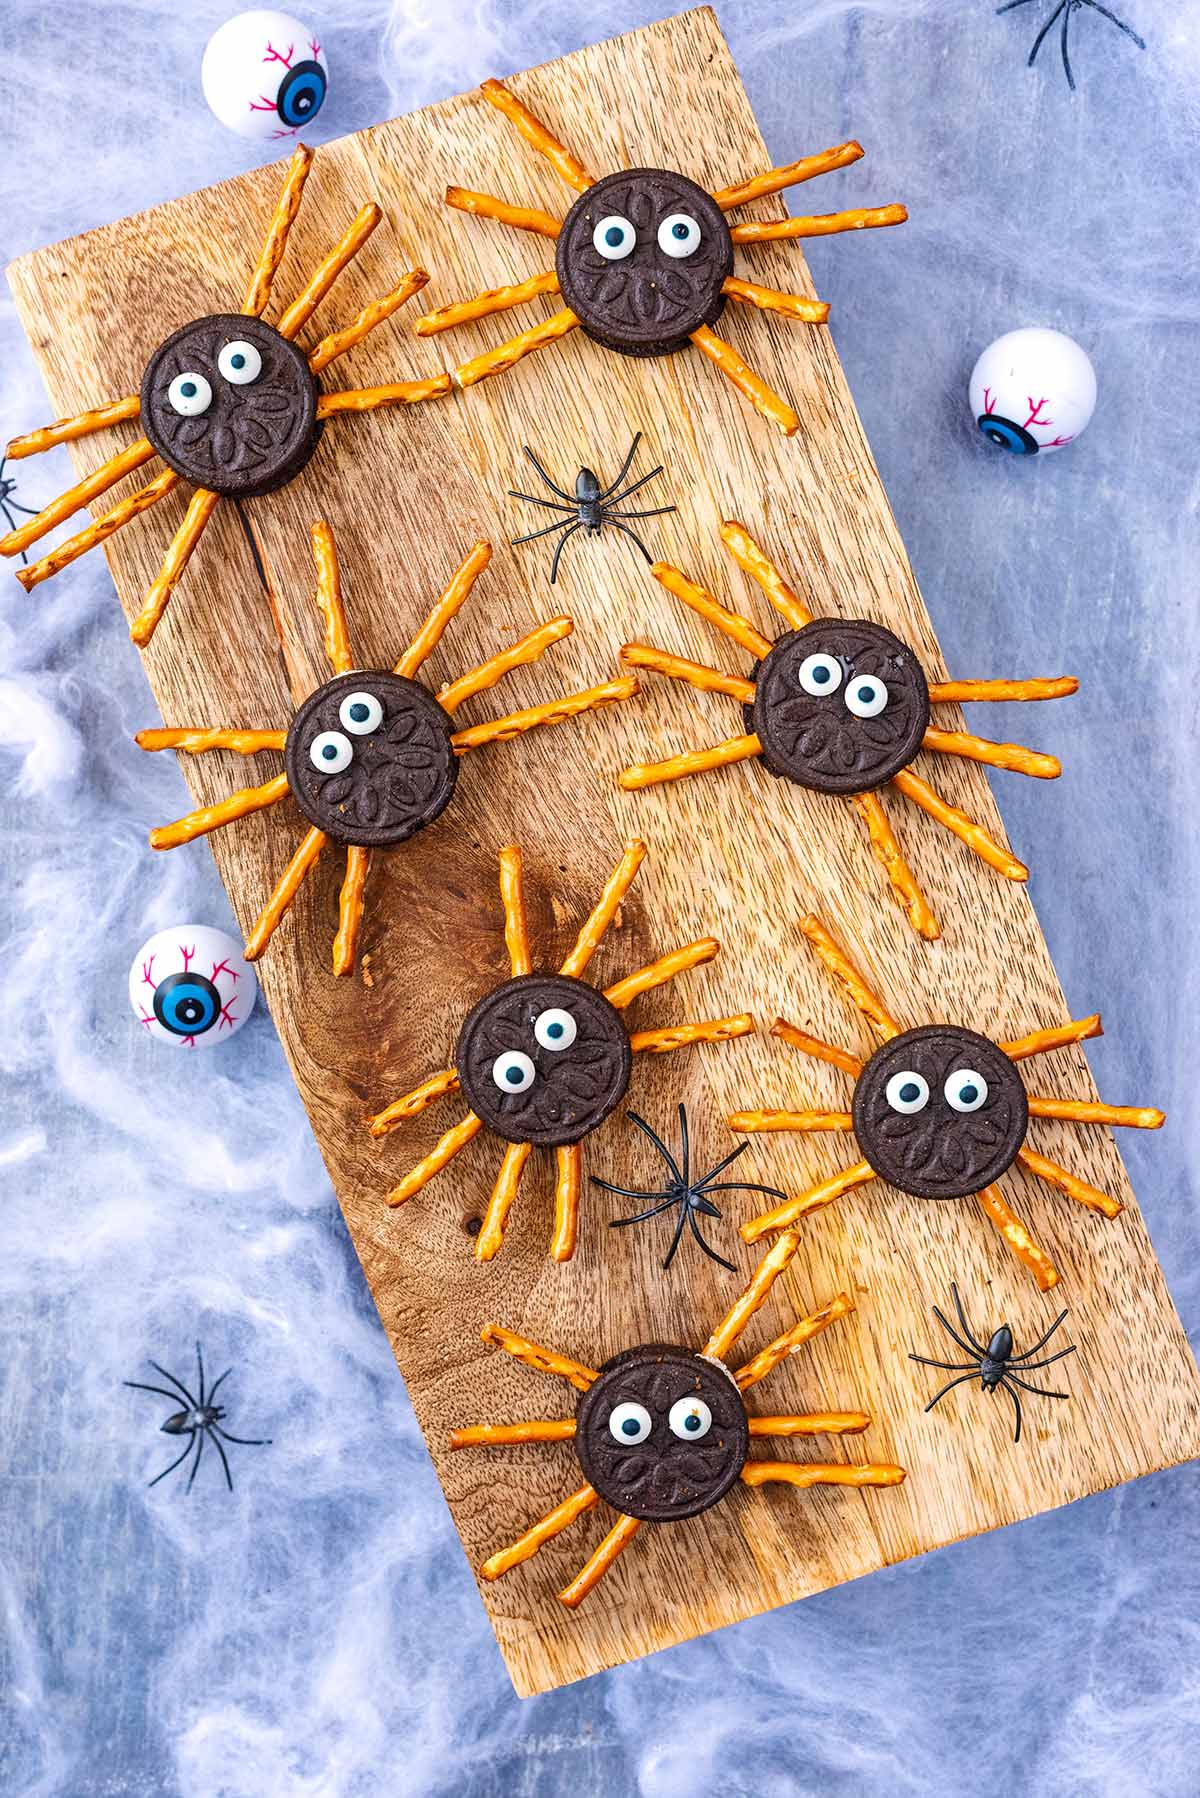 A wooden serving board with seven Oreo cookies decorated like spiders.